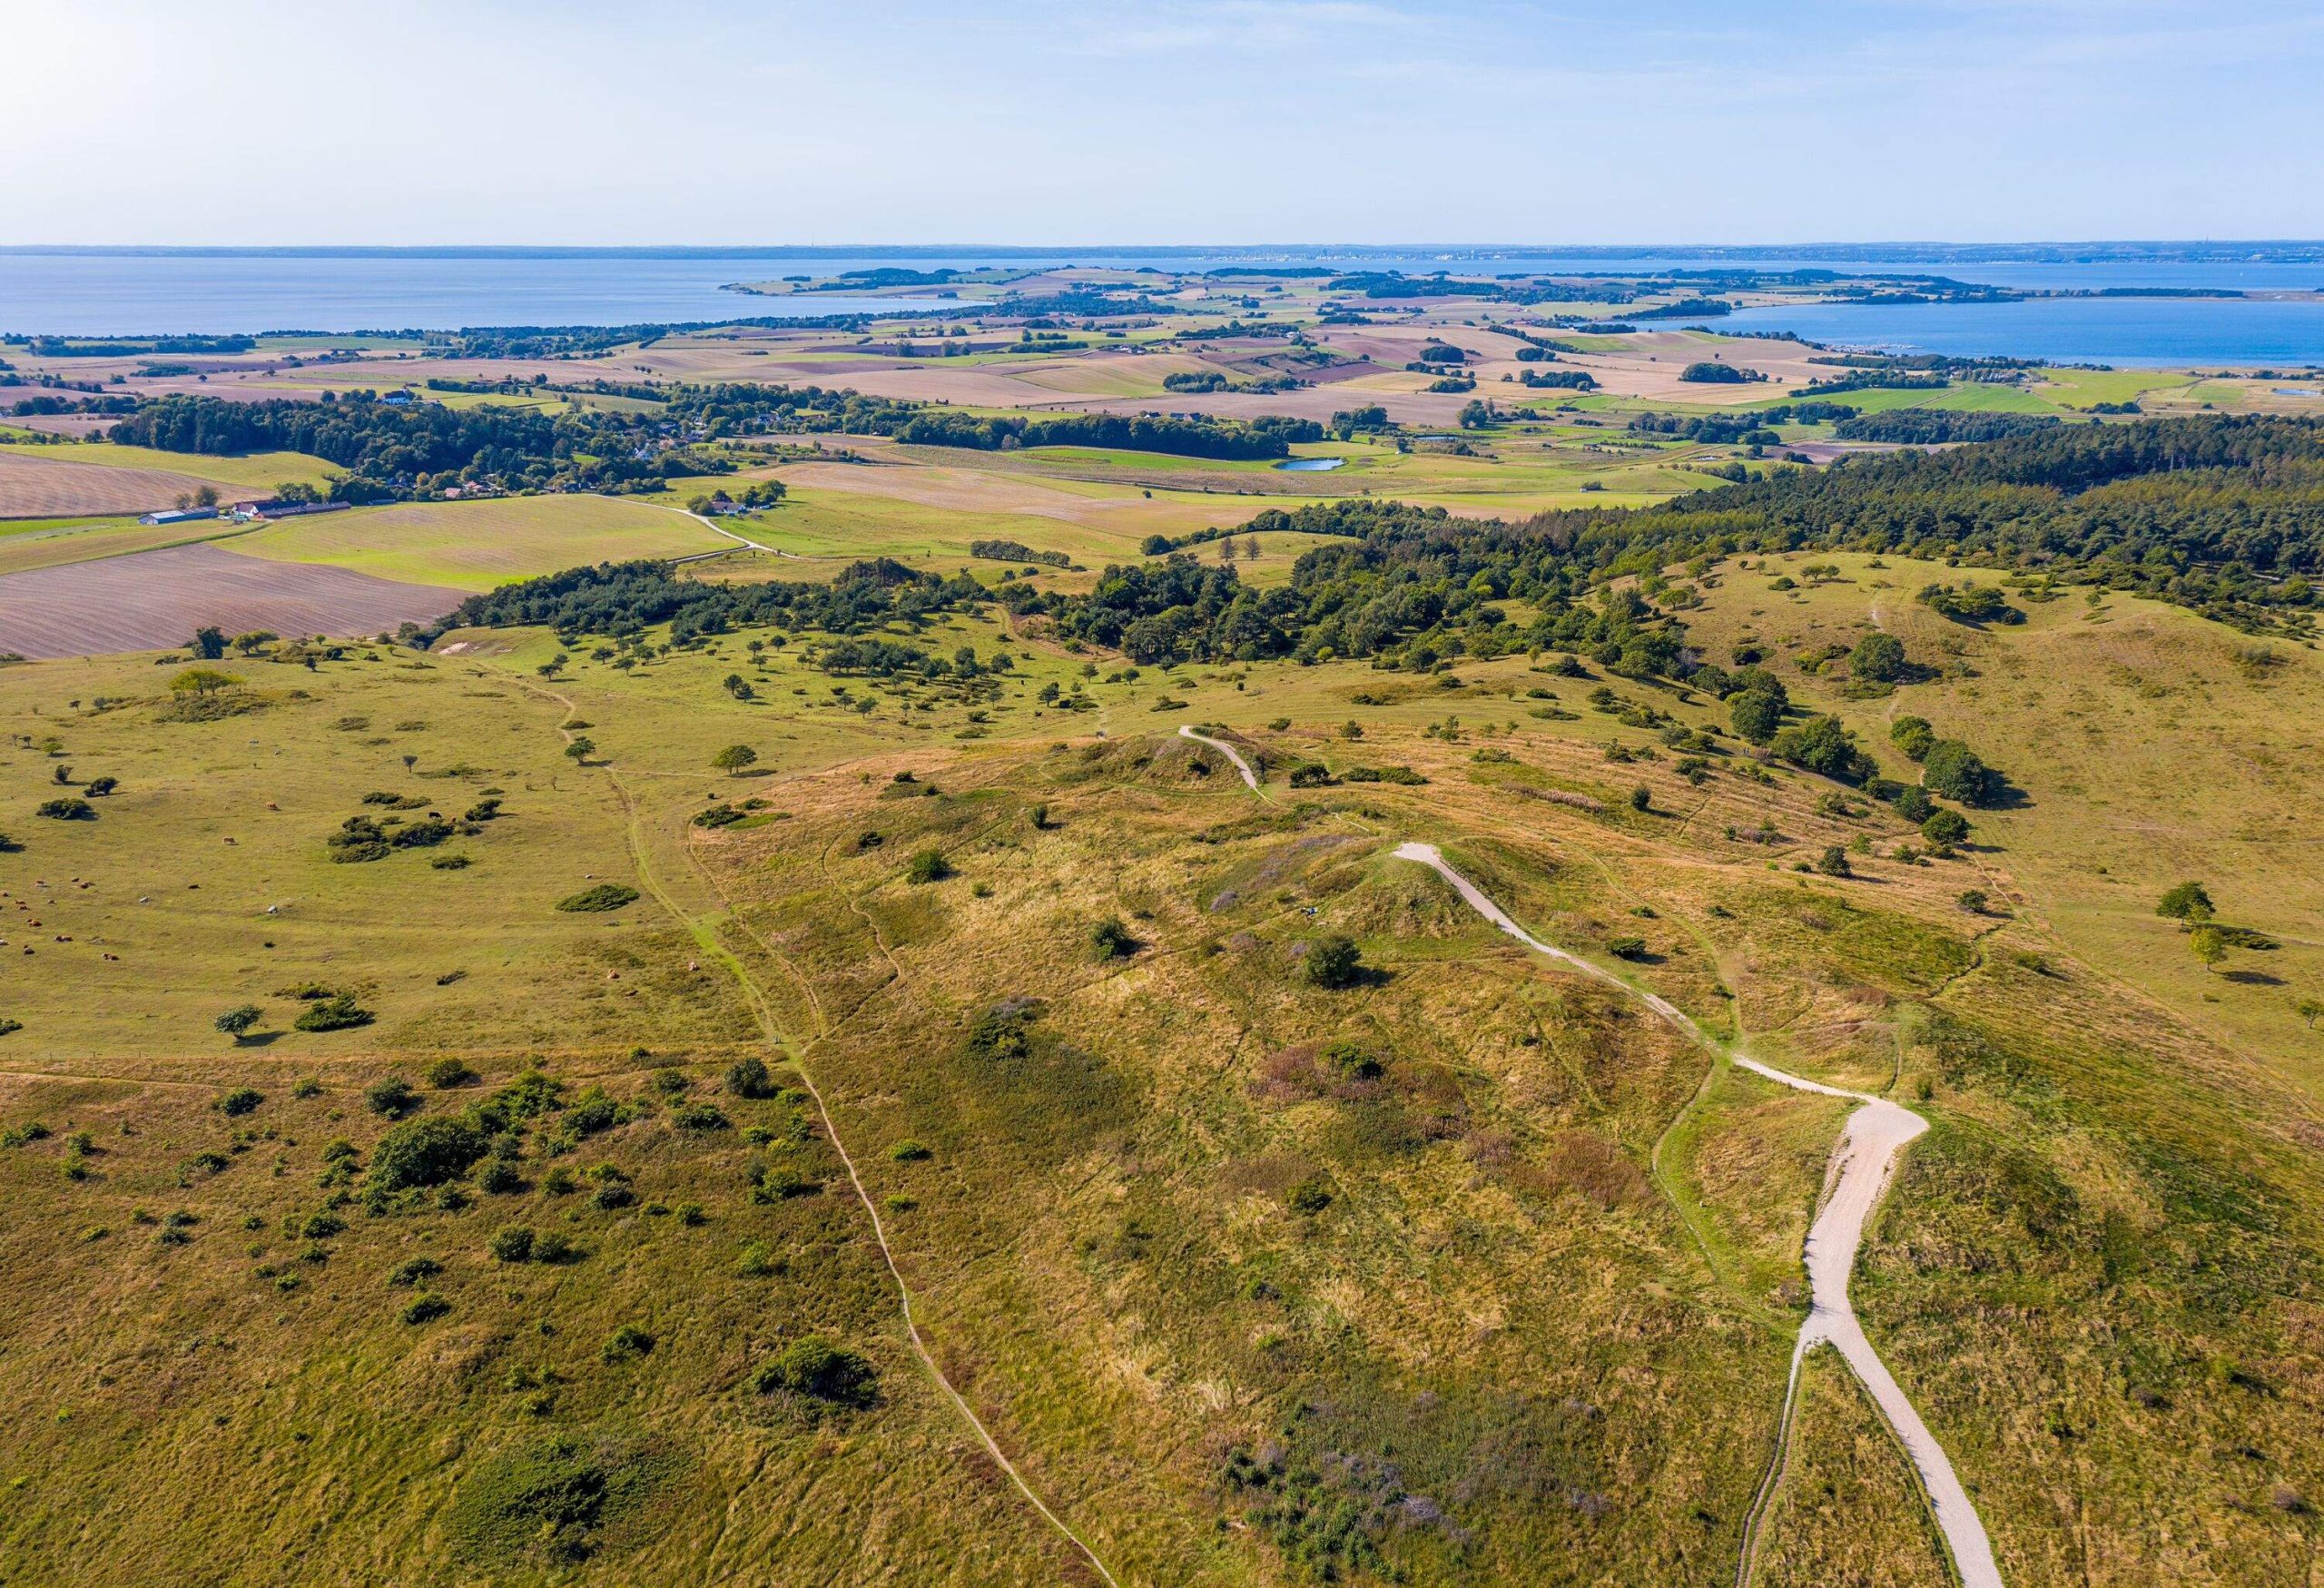 Mols Hills, Denmark - Trehøje seen from above. The three Bronze Age mounds of Trehøje, 127 metres above sea level, offer a panorama view from Aarhus to Ebeltoft, including four inlets: Kalø, Begtrup, Knebel and Ebeltoft. From up here you can see the National Park’s border to the south west, where fertile clay once deposited by the ice means the land is intensely farmed, as opposed to the nutrient-poor sand left by the ice on the hills and on the coastline along Ebeltoft Vig.